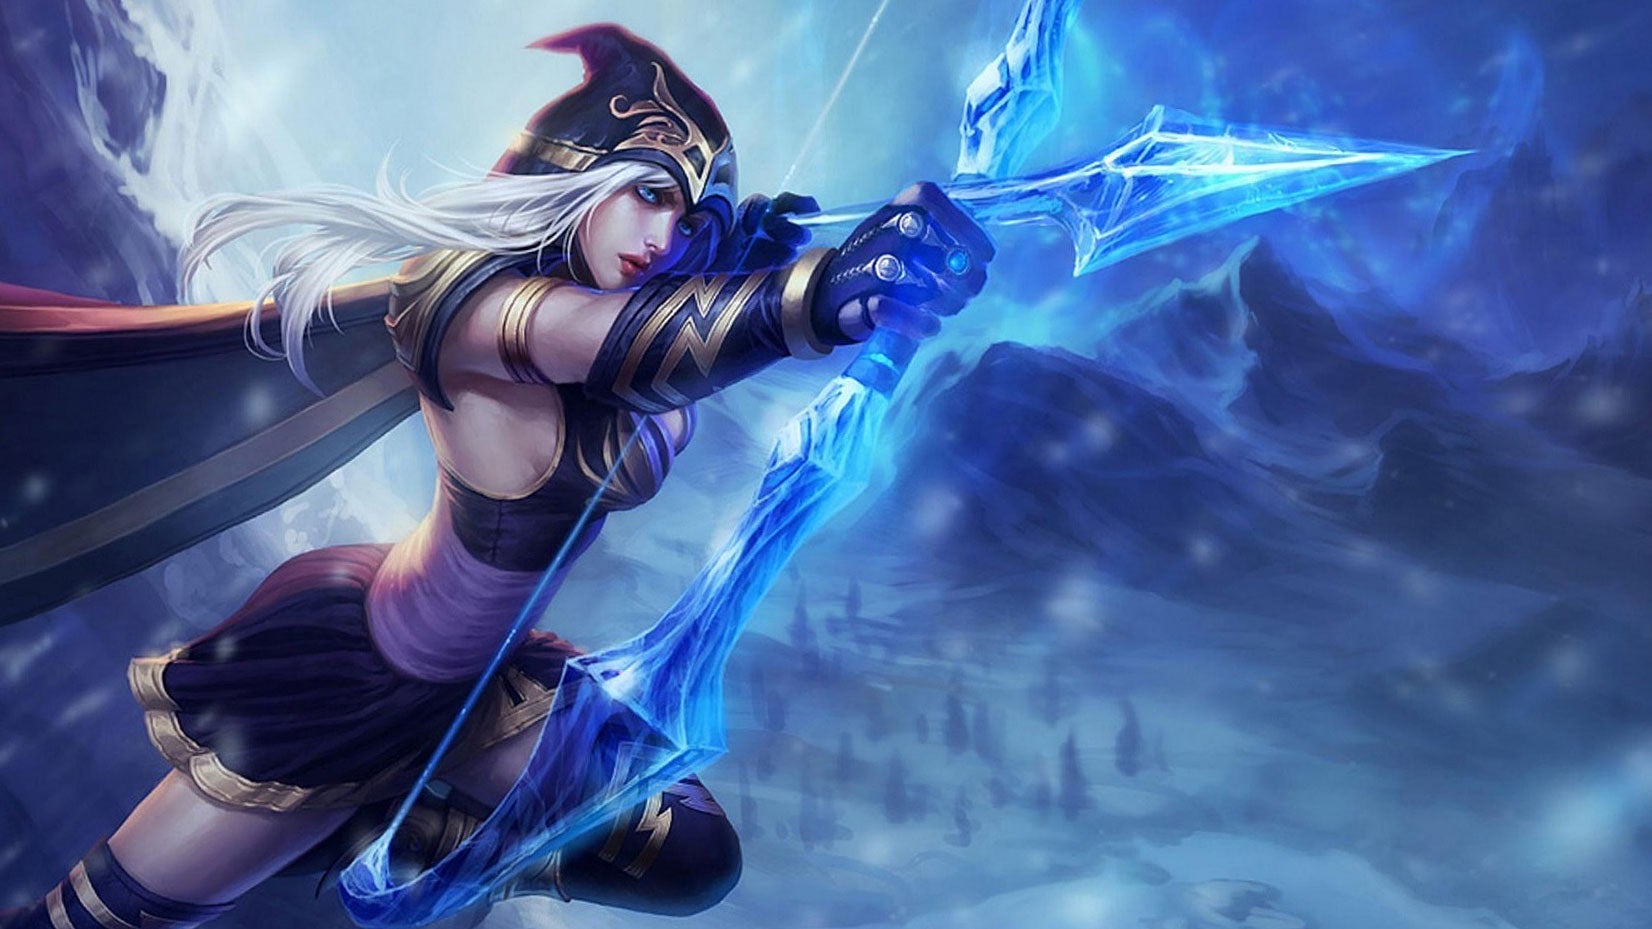 Image for Riot announces 180 million monthly players across Runeterra games